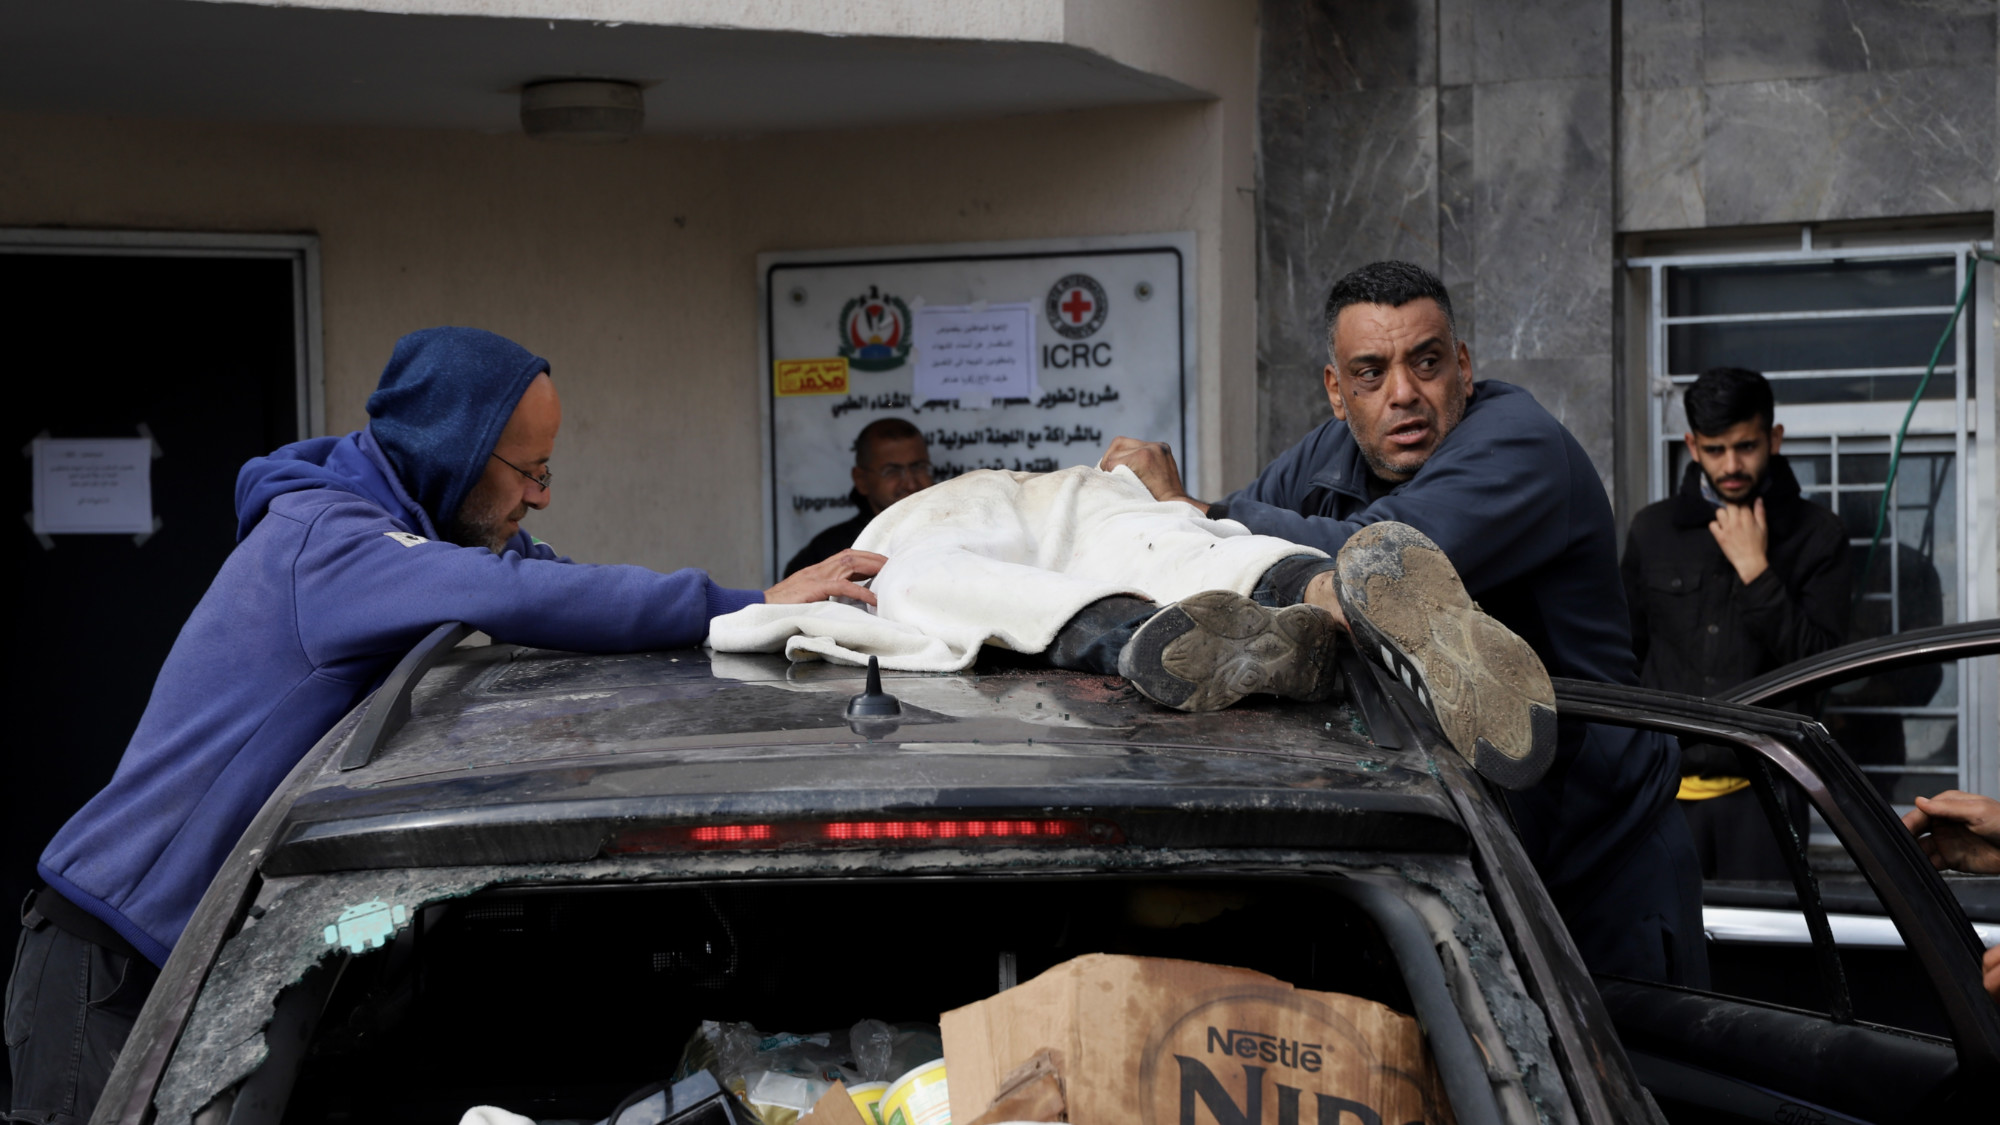 A Palestinian man is brought to al-Shifa hospital in Gaza City, which has been brought to its knees by Israeli attack (MEE/